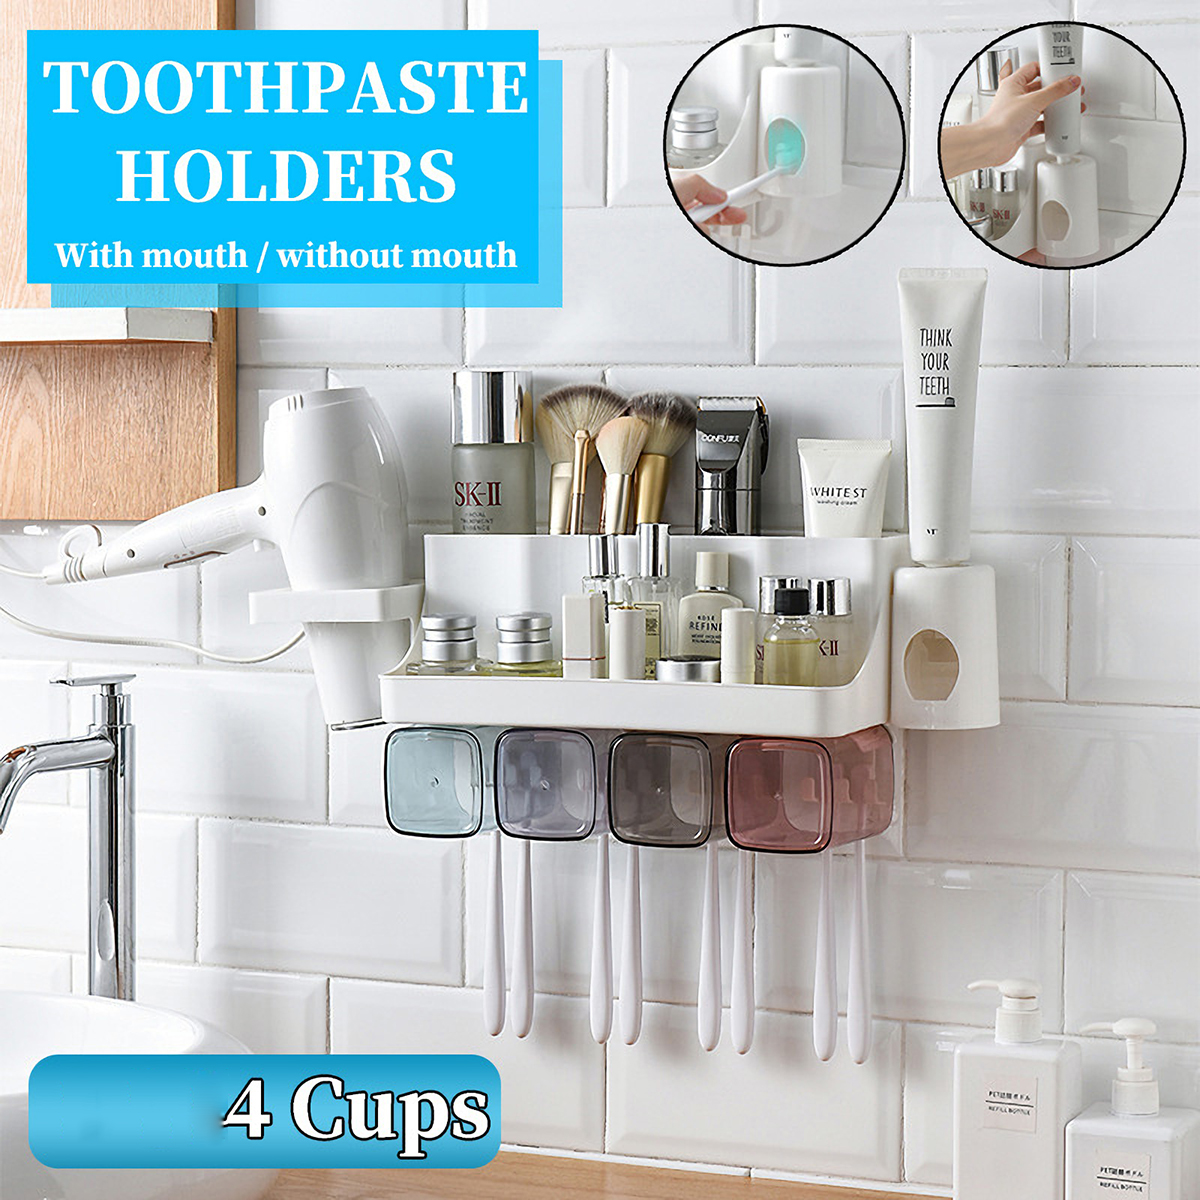 Toothpaste-Holders-Toothbrush-Rack-Wall-Mounted-Space-Saving-Toothbrush-Toothpaste-Squeezer-Kit-With-1801949-1